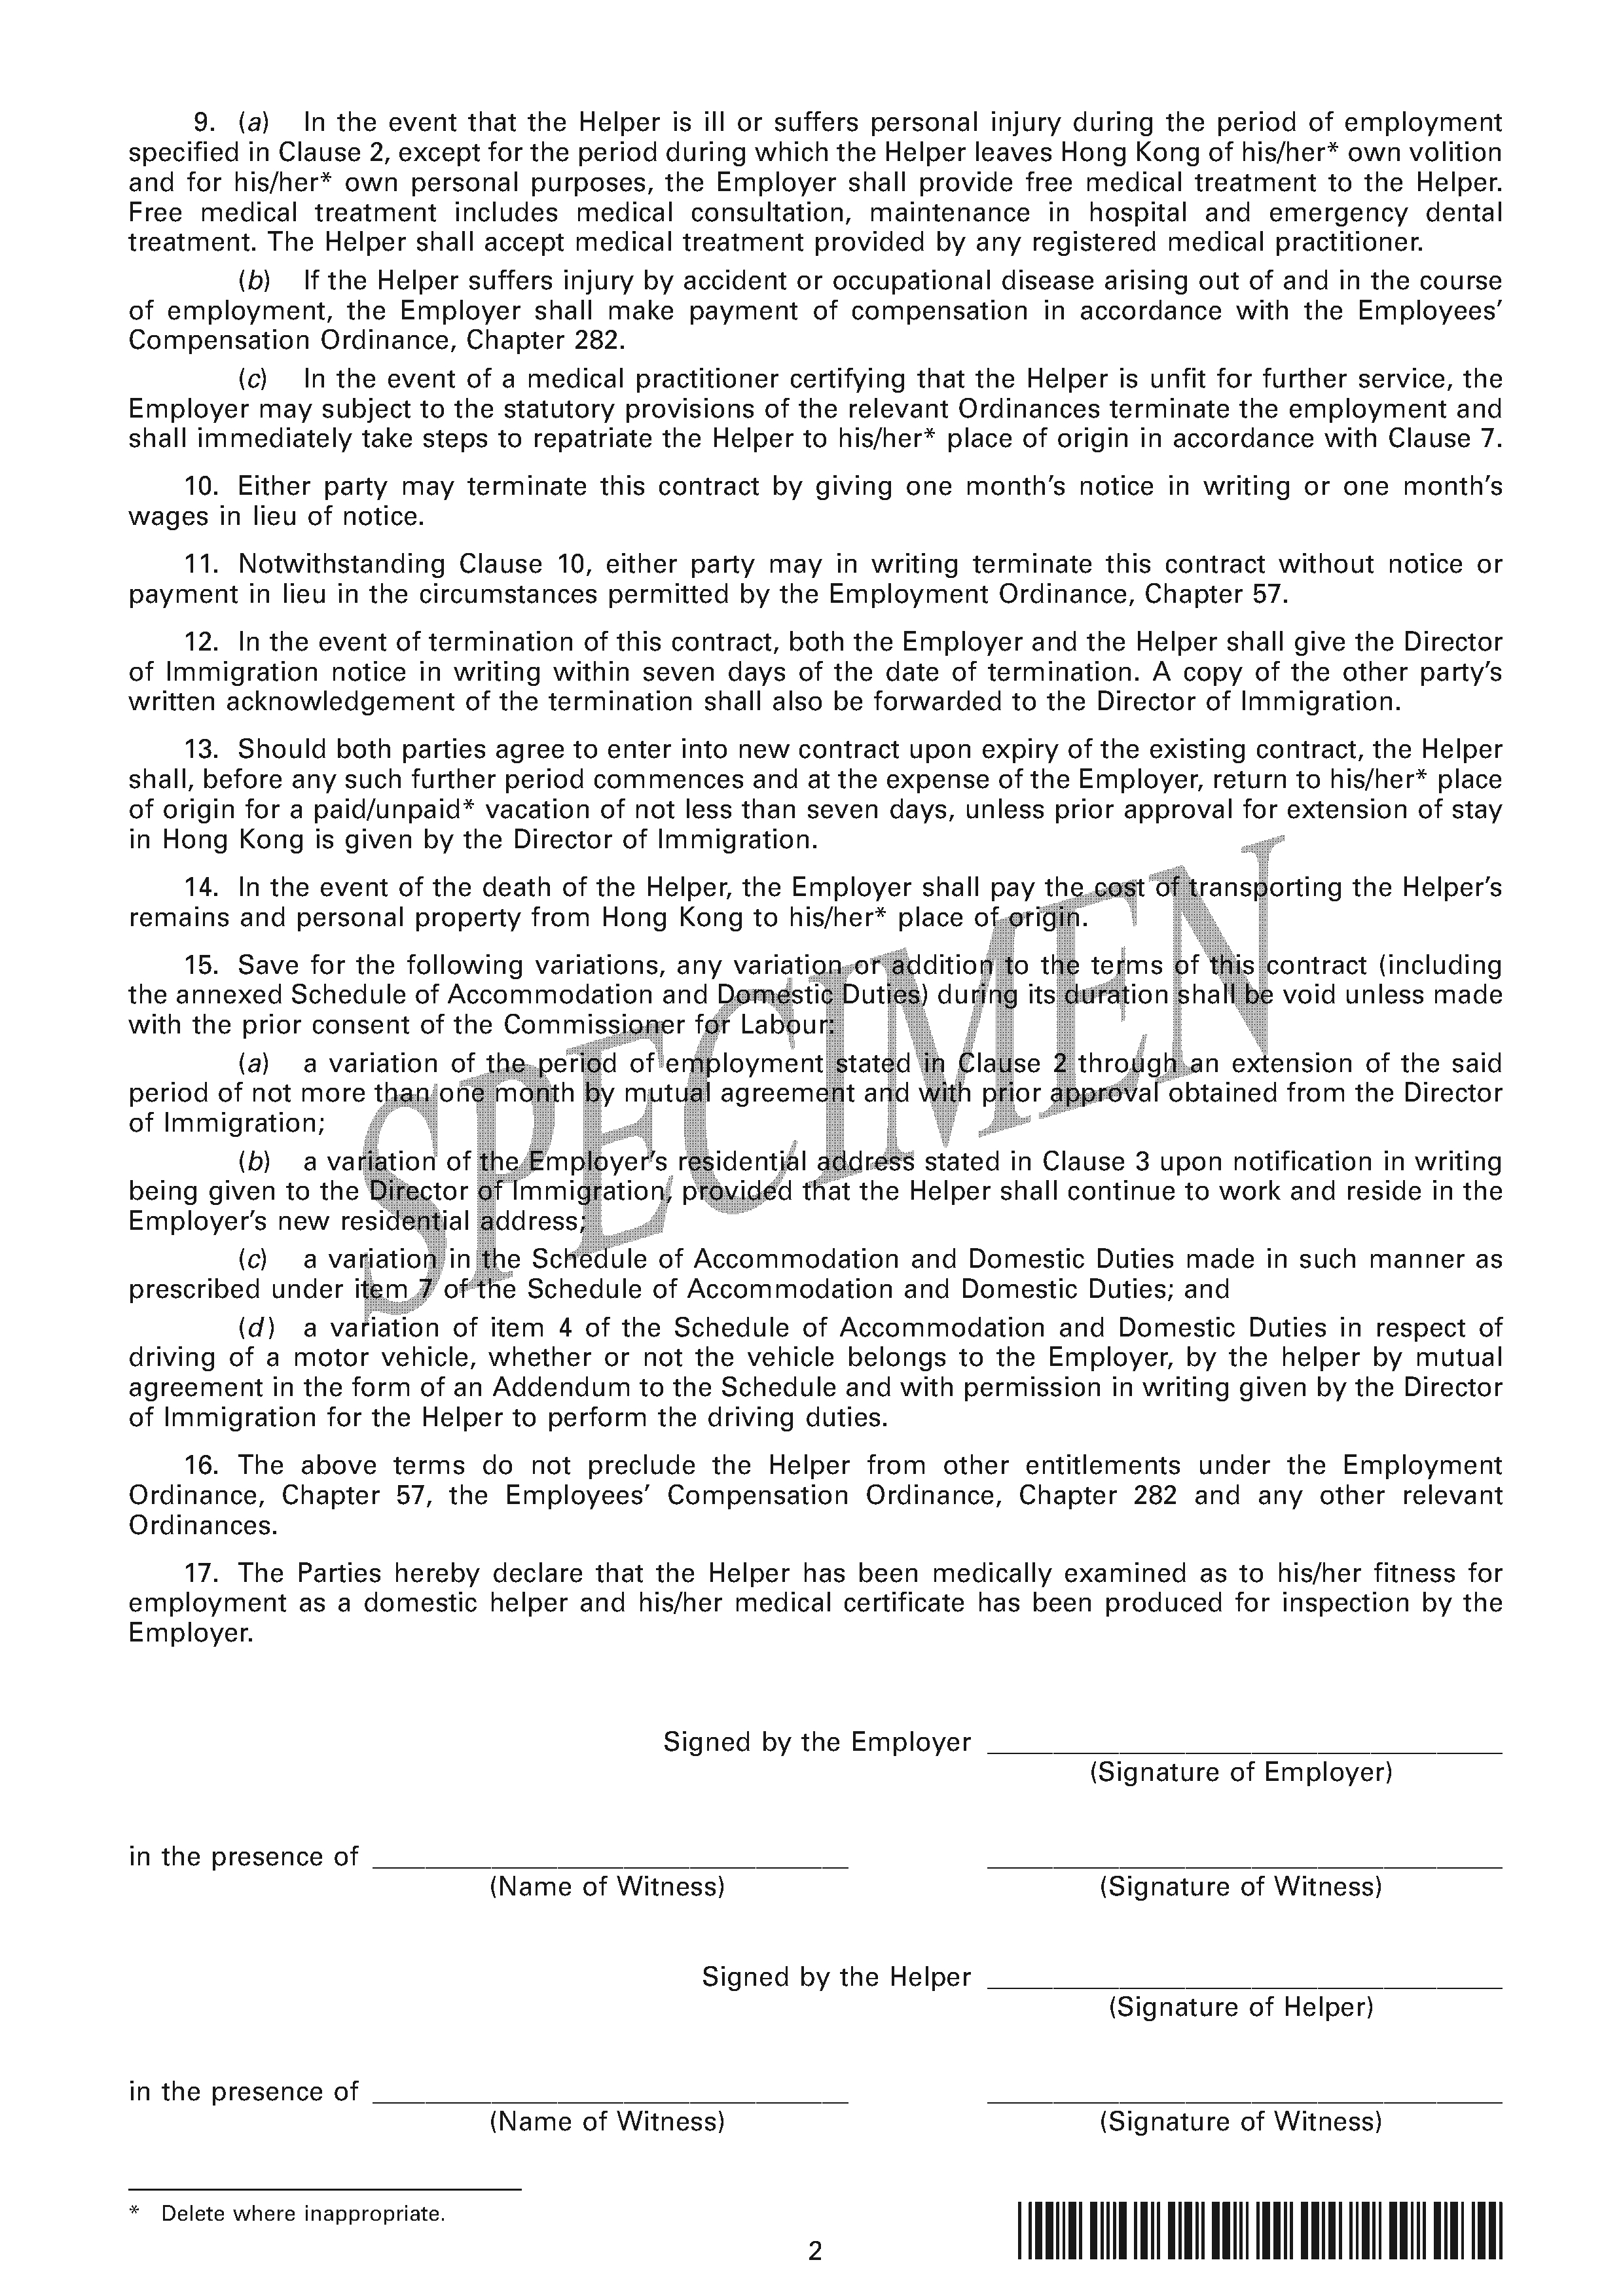 Employment Contract for a Domestic Helper Recruited from ...